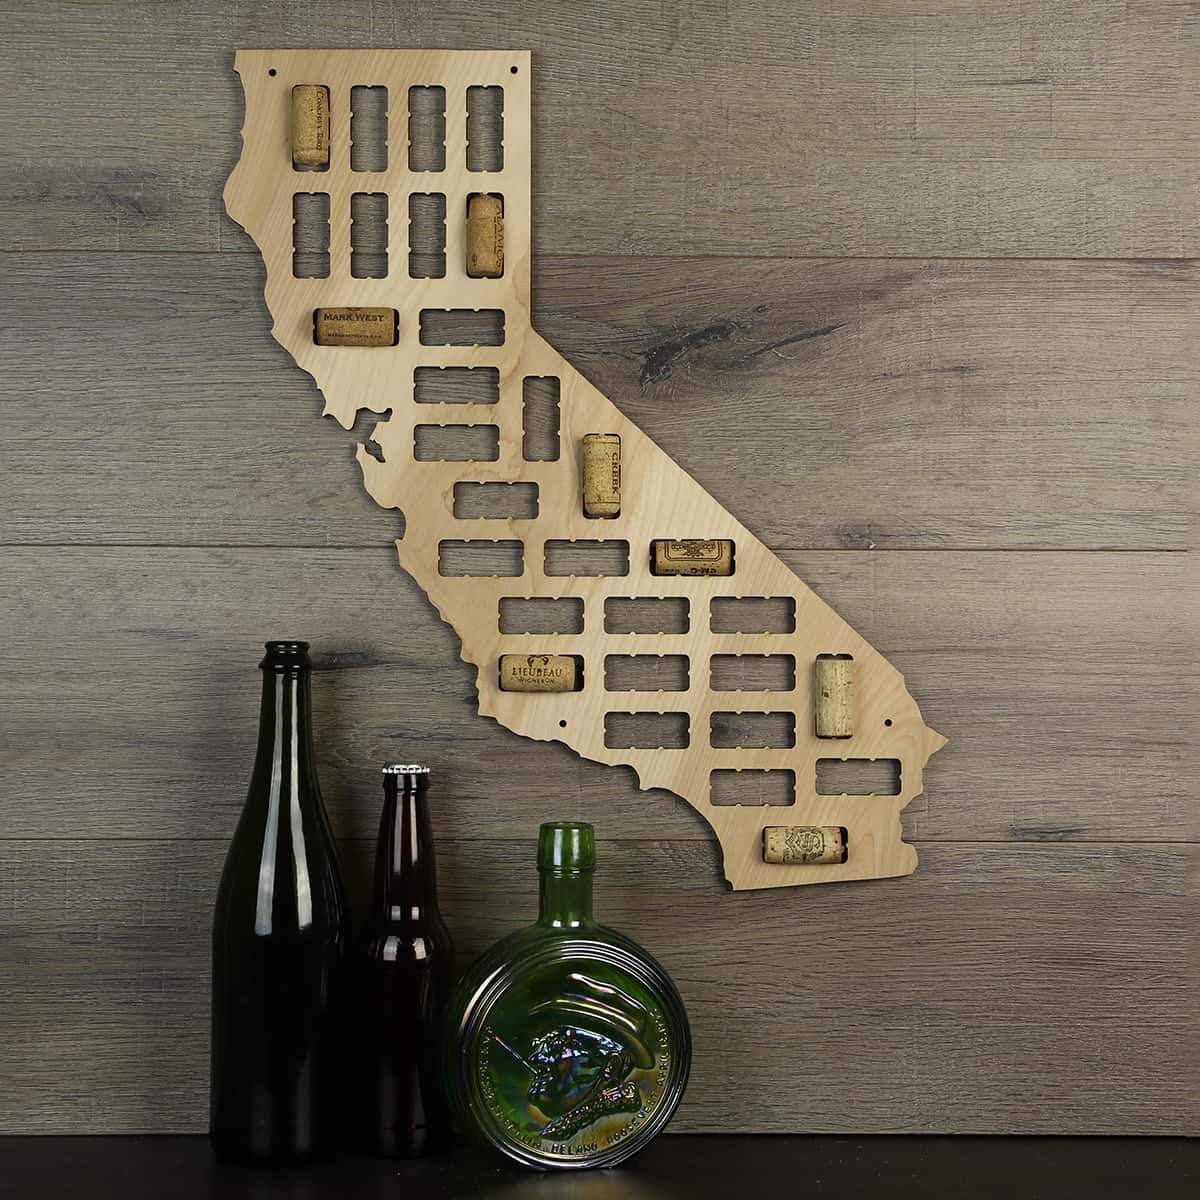 Torched Products Wine Cork Map California Wine Cork Map (778951098485)